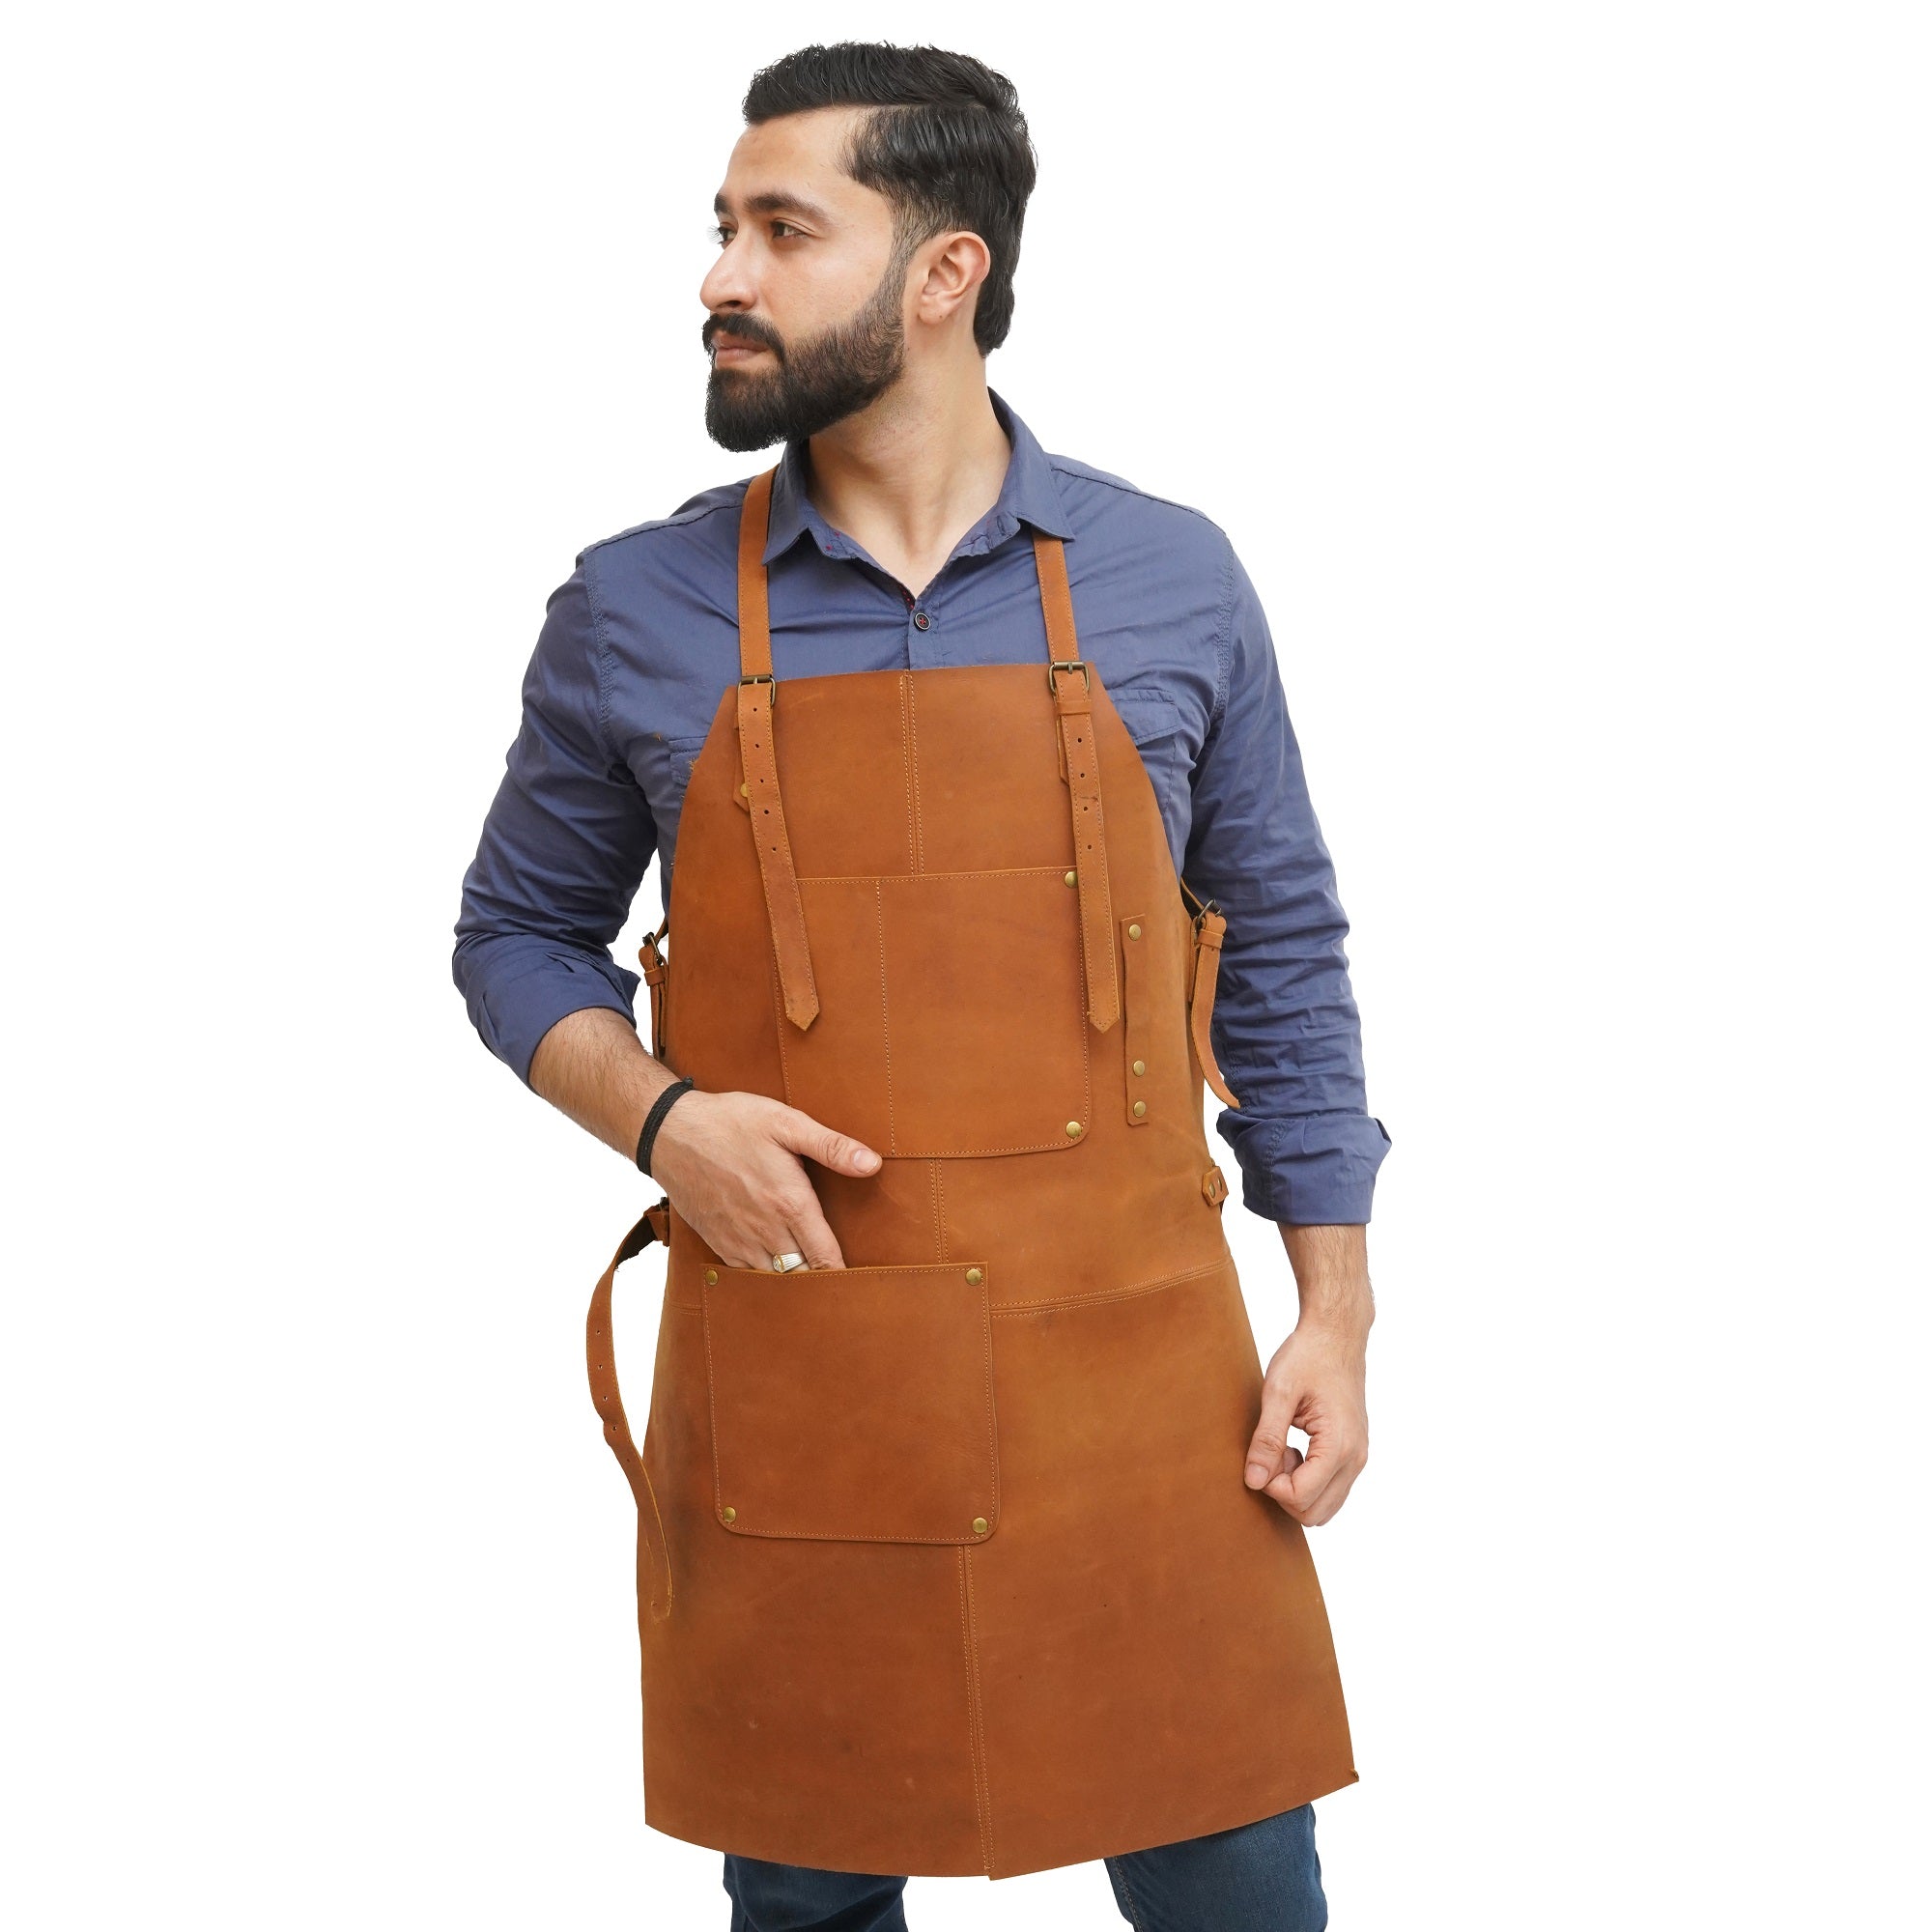 Leather Apron, Leather Chef Apron, Leather BBQ Apron, Leather Butcher Apron, Leather Barber Apron, Leather Welding Apron, Leather Blacksmith Apron, Leather Woodworking Apron, Leather Carpenter Apron 